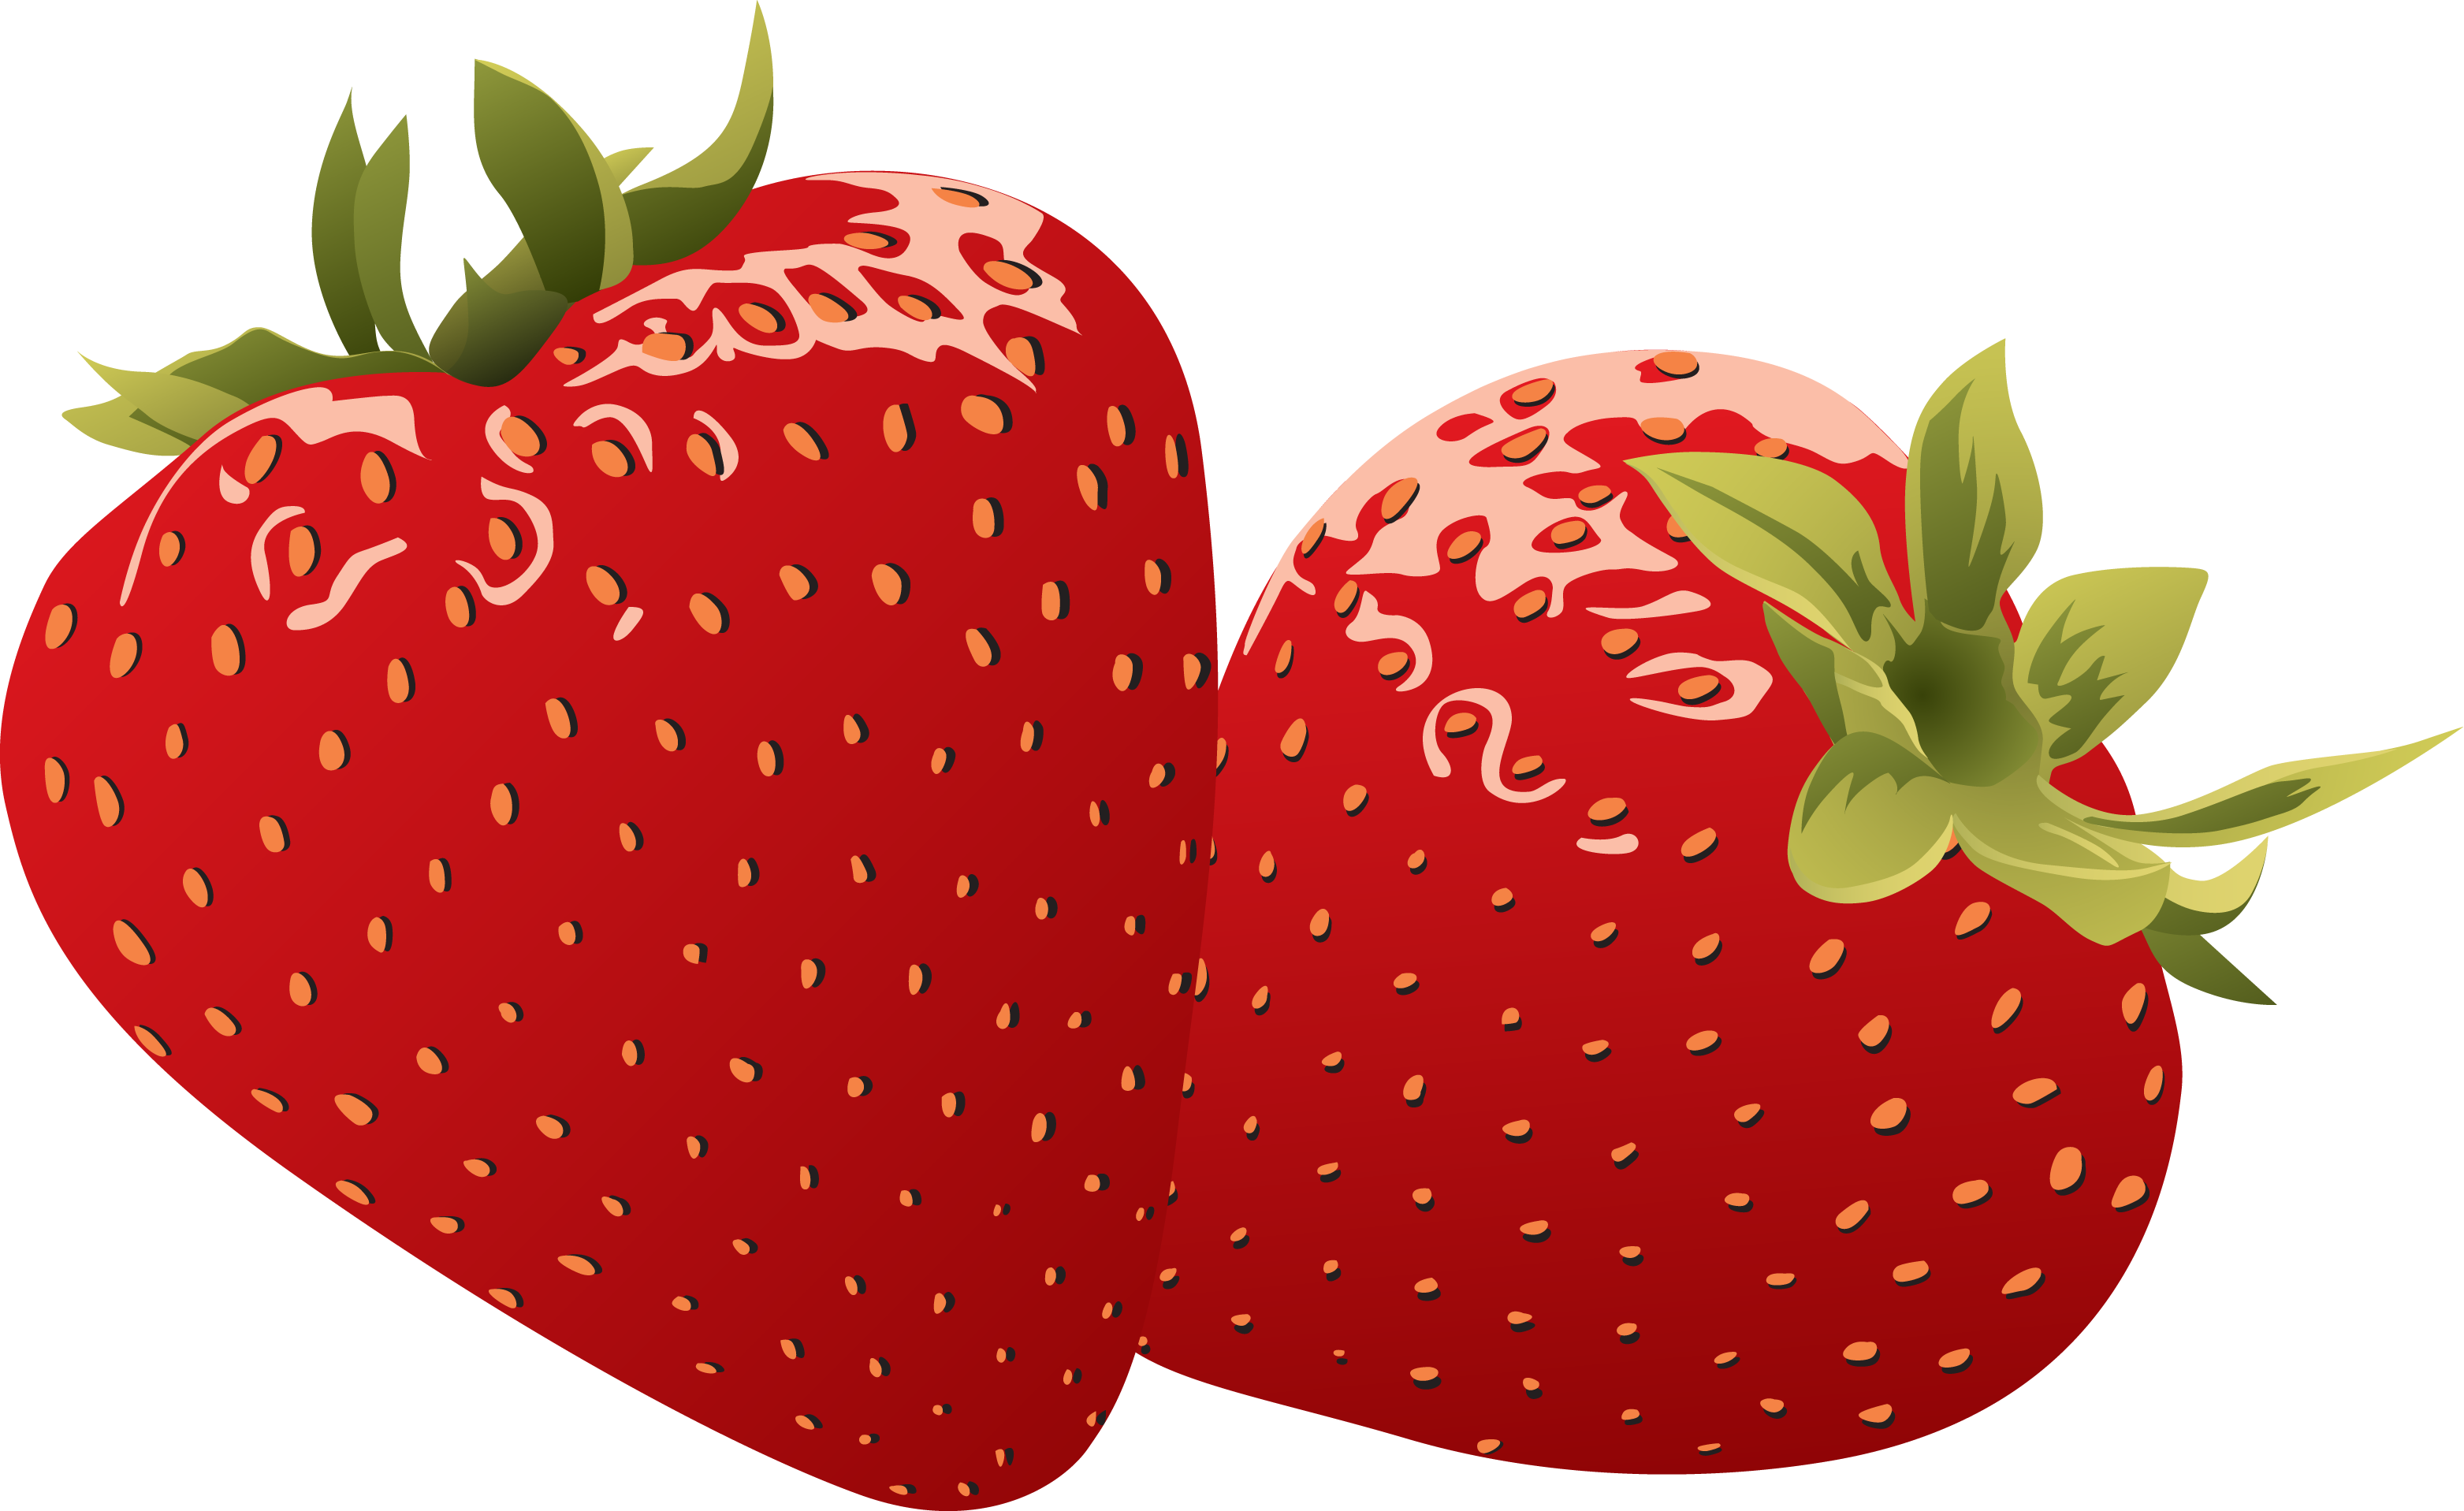 Strawberry clipart free